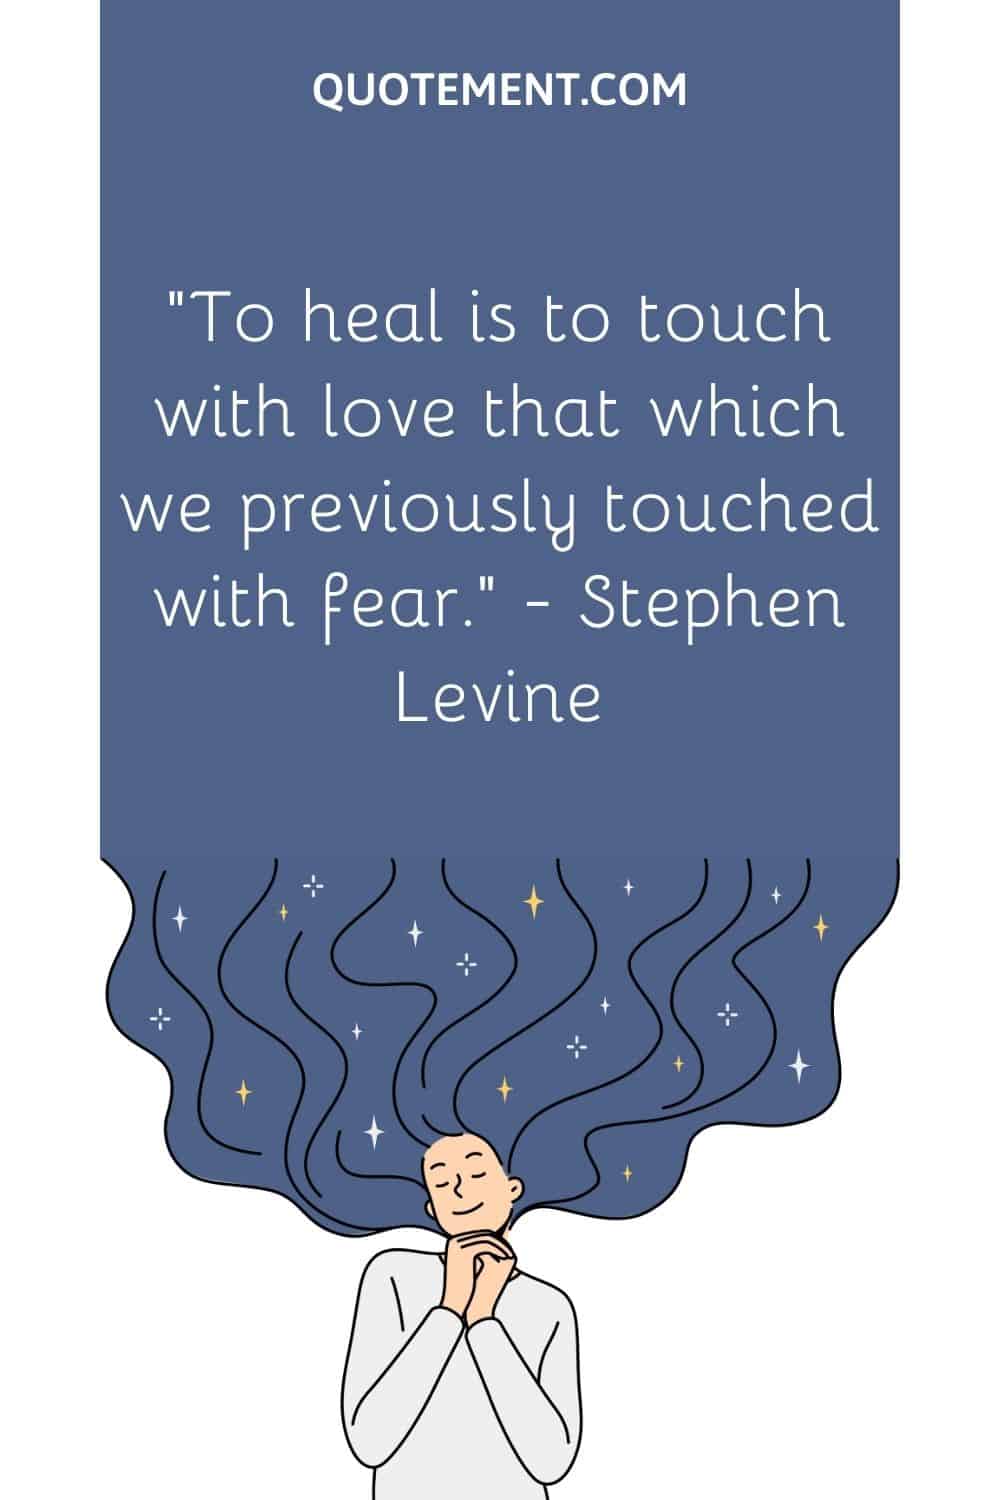 To heal is to touch with love that which we previously touched with fear